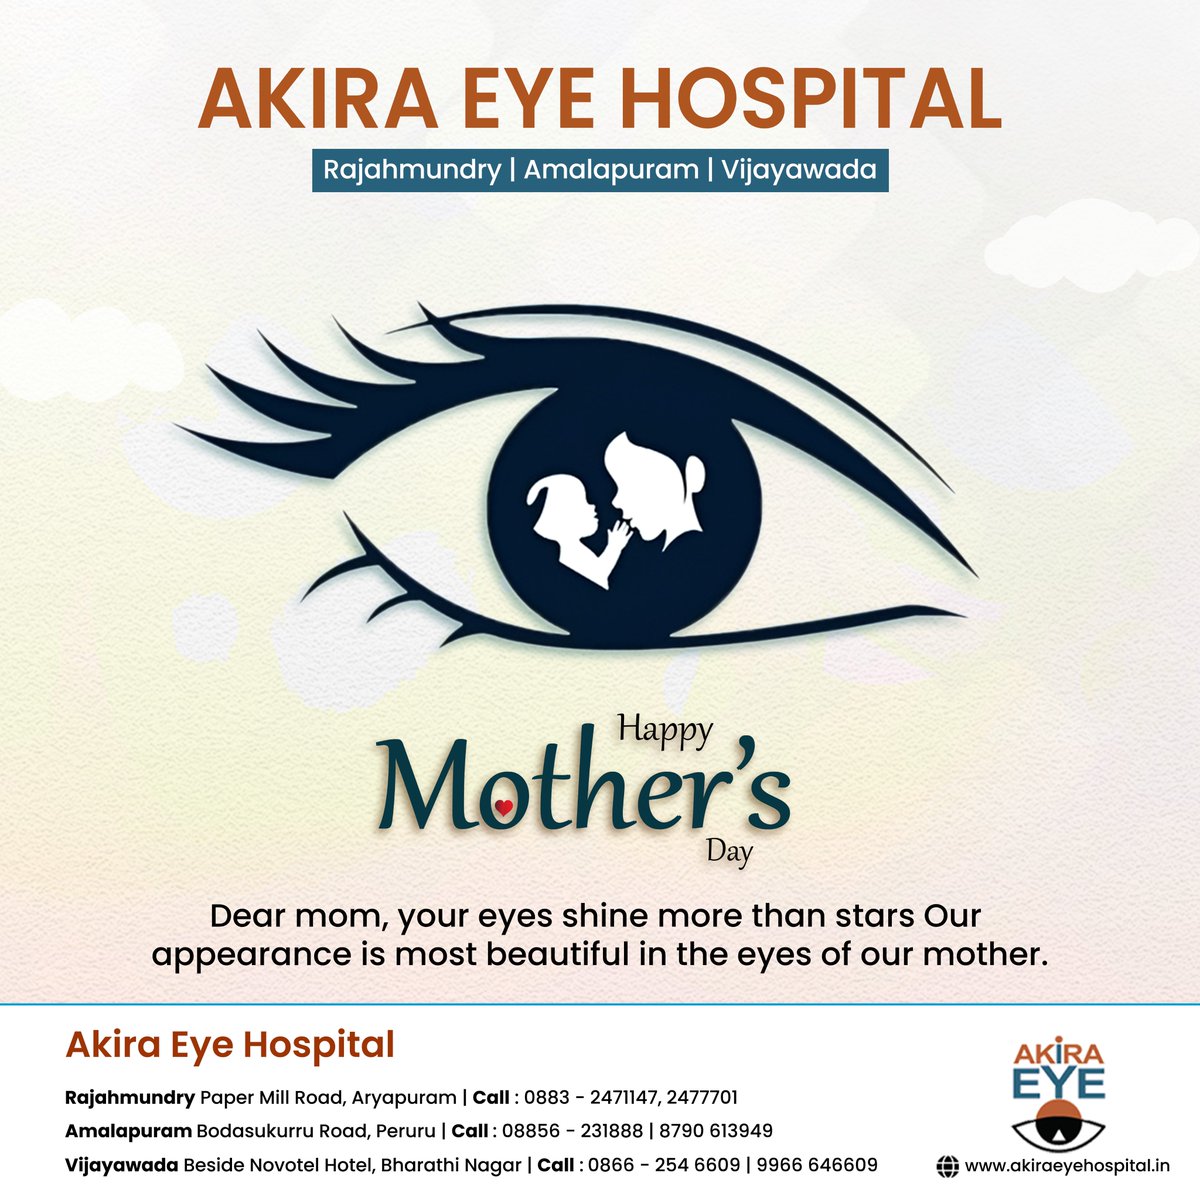 Happy Mother's Day to all the incredible mothers out there! Your vision of love and care inspires us every day.
.
.
#akiraeyehospital #vijayawada #mothersday #MomLove #MomsRock #MomIsQueen #MomMagic #SuperMom #MomsAreHeroes #MomLife #MotherhoodJoy #CelebrateMom #MomInspiration